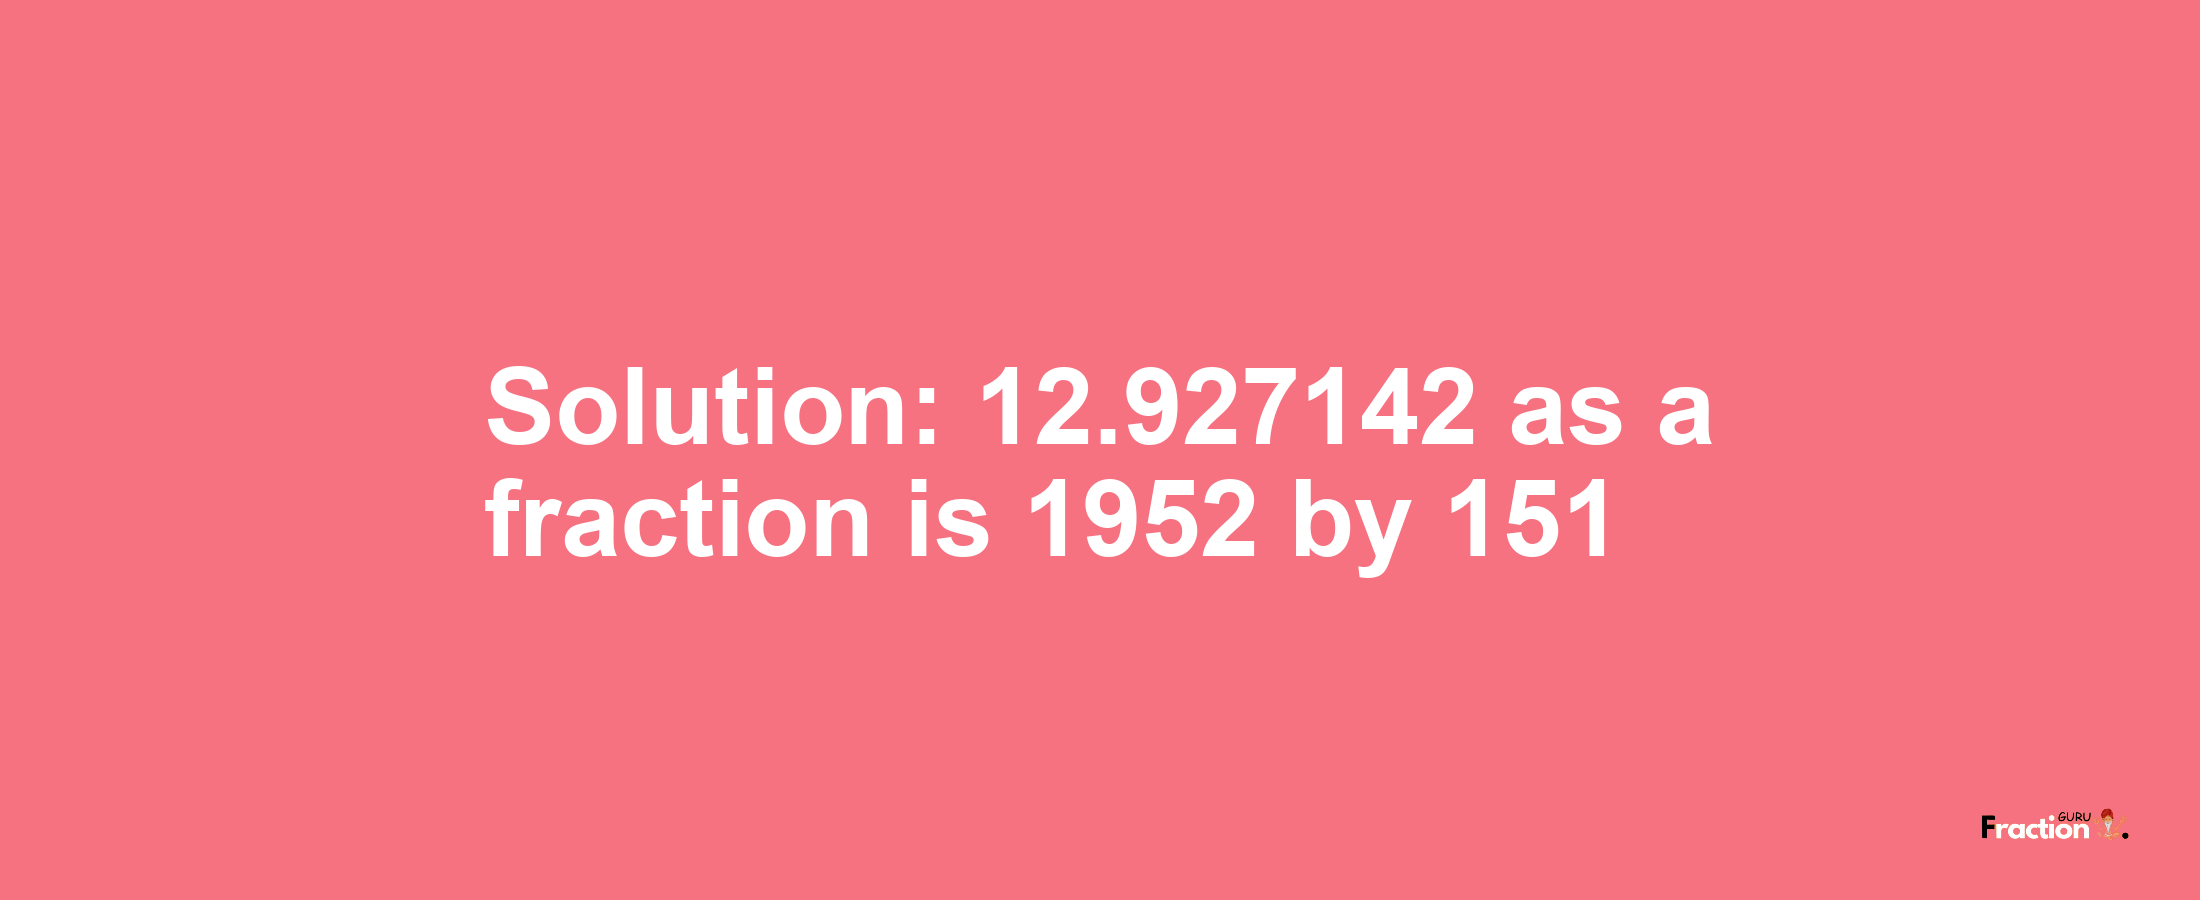 Solution:12.927142 as a fraction is 1952/151